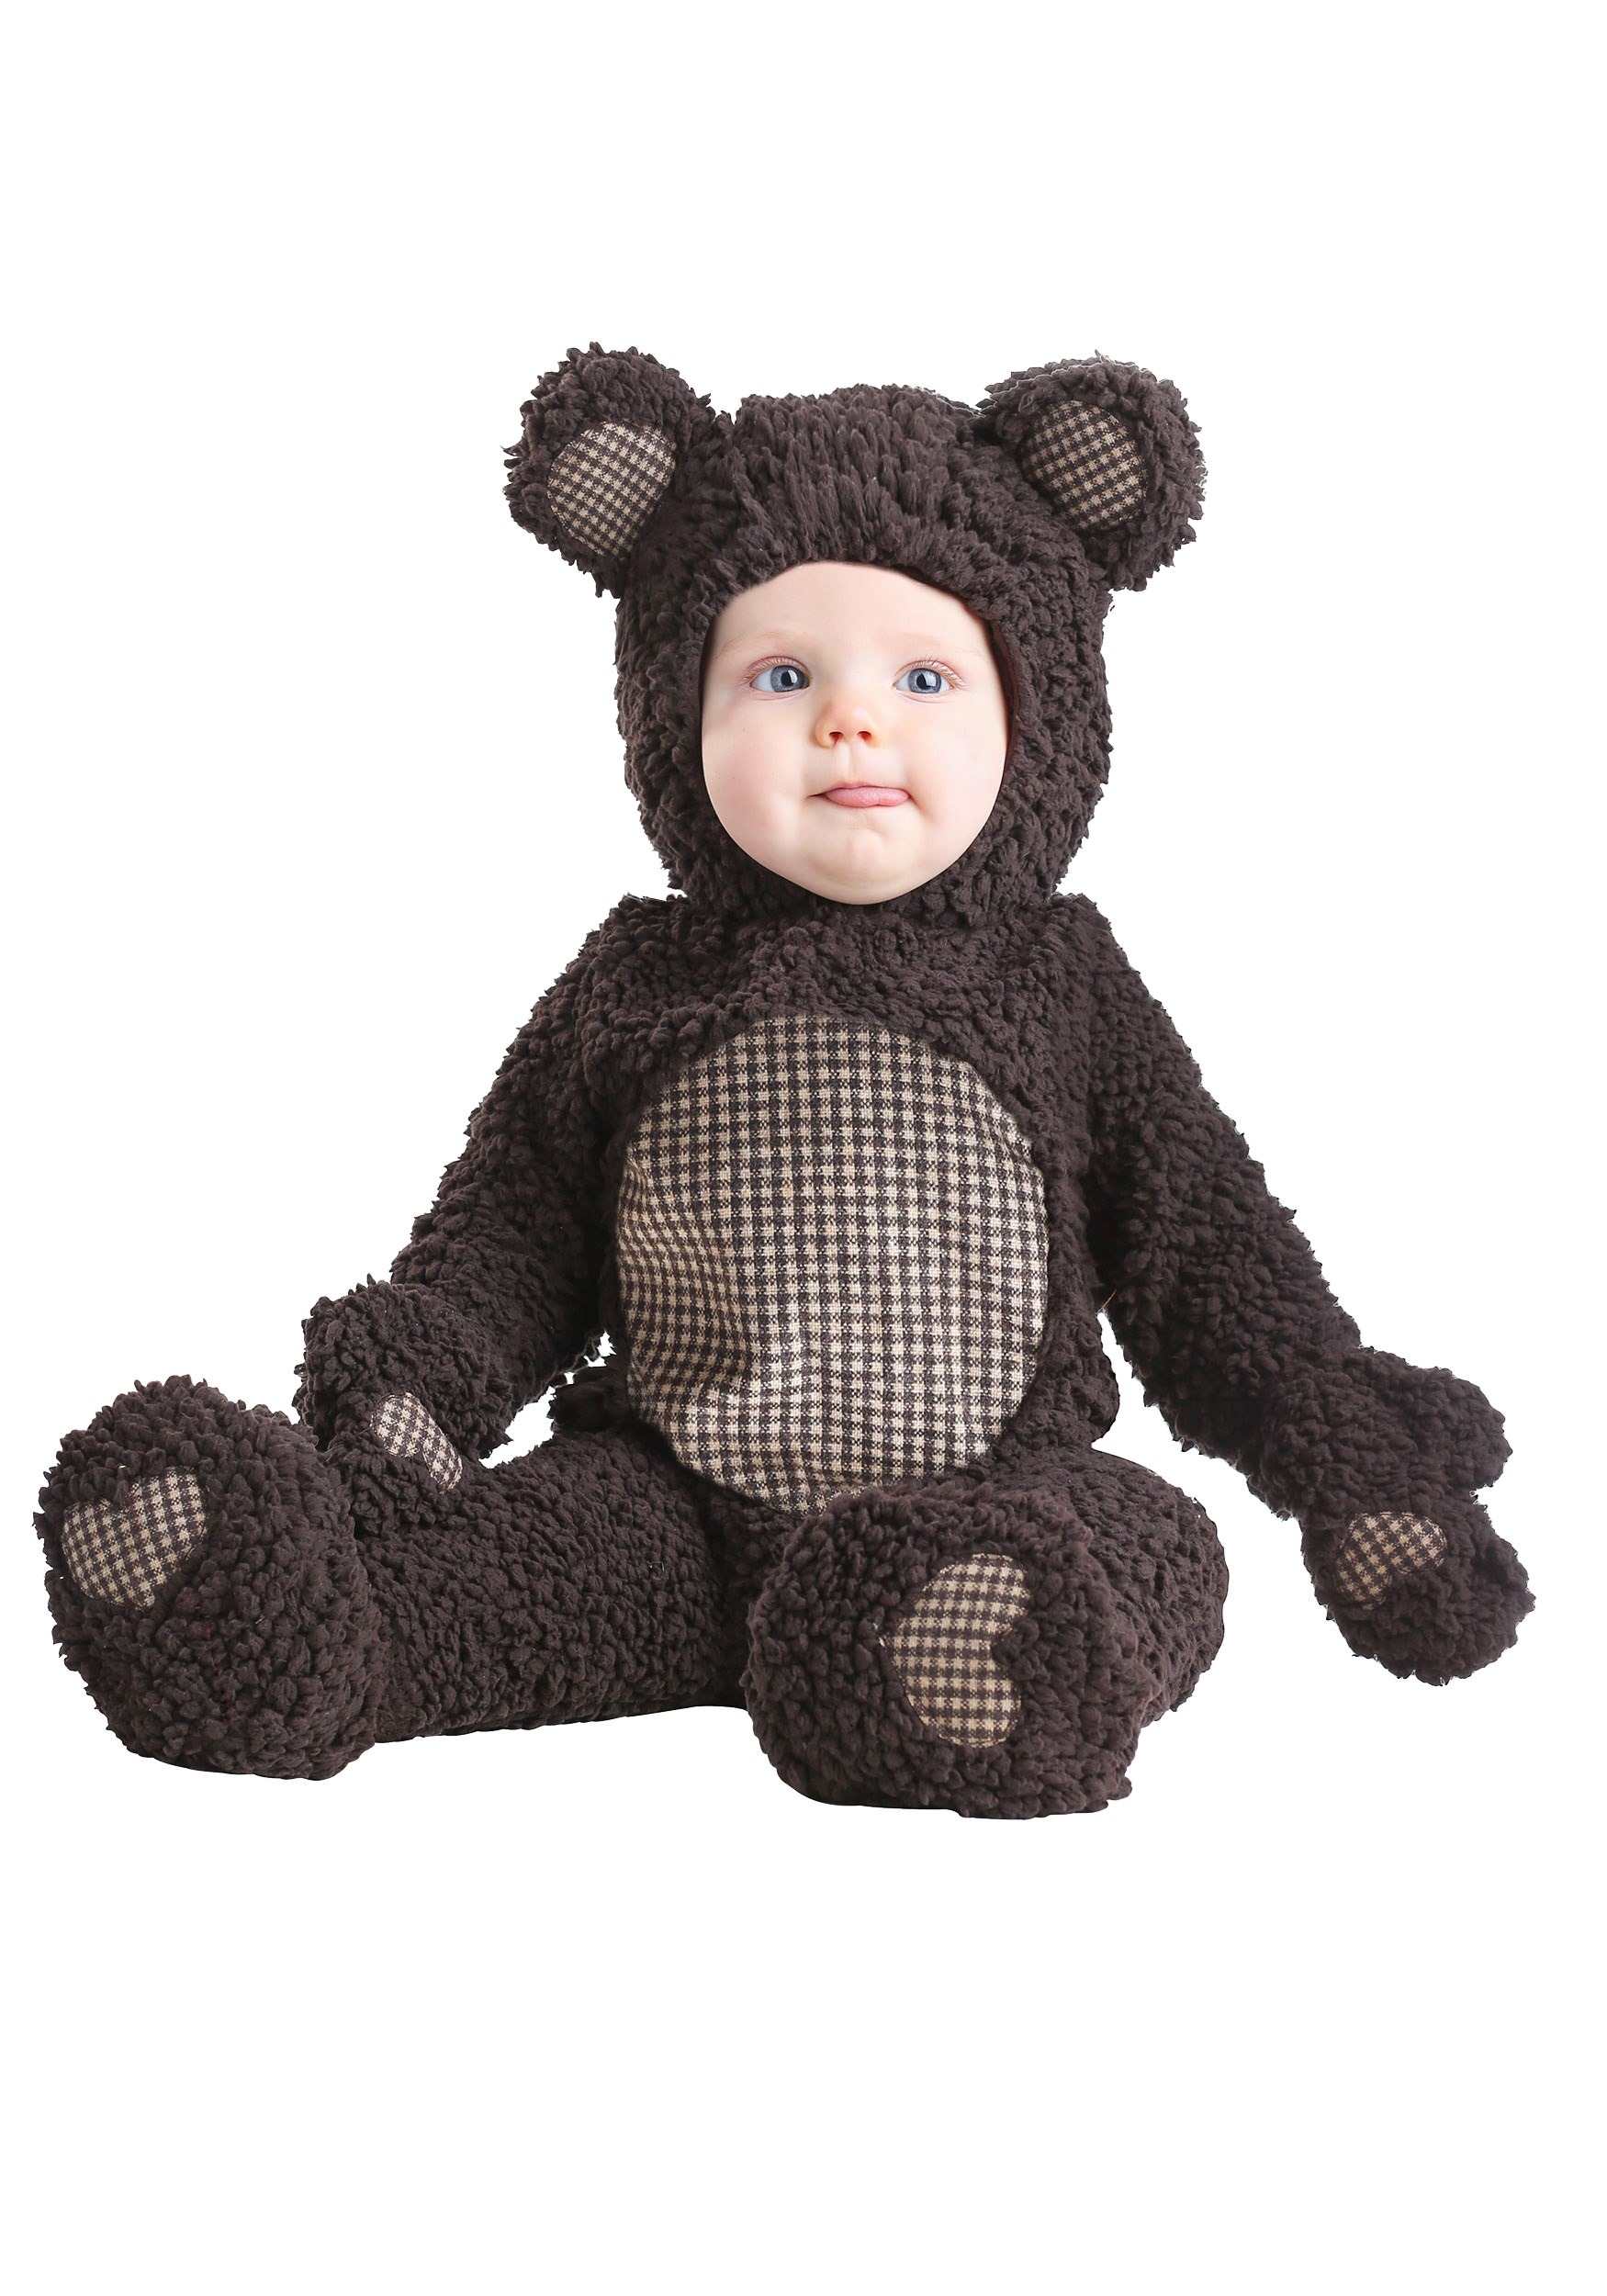 Photos - Fancy Dress BEAR FUN Costumes Baby  Costume for Infants | Warm Halloween Costumes Brown 